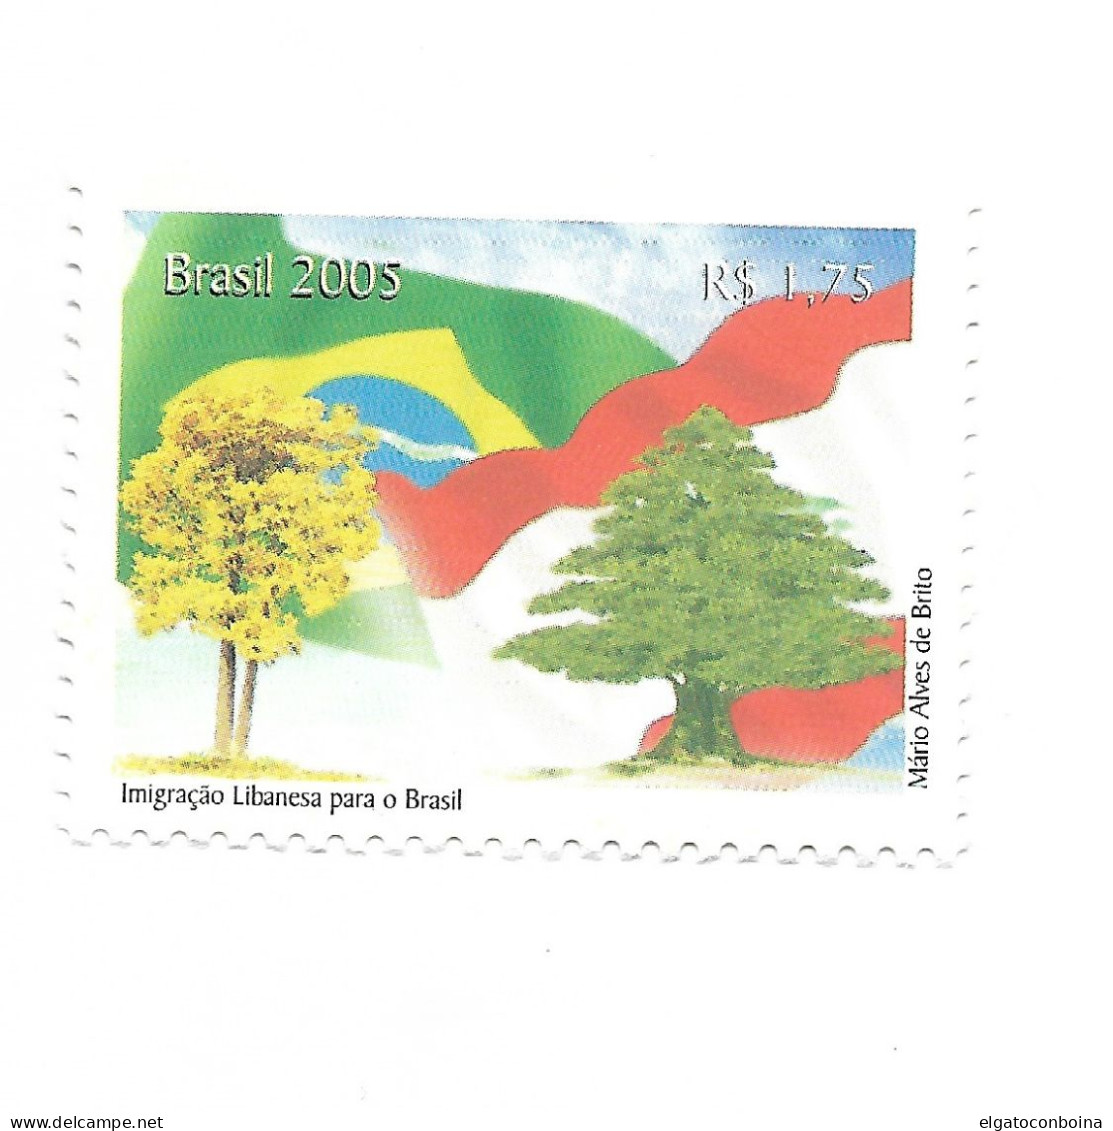 BRAZIL 2005 LIBANESE INMIGRATION TO BRAZIL FLAGS TREE CULTURES 1 VALUE MINT NH - Ungebraucht